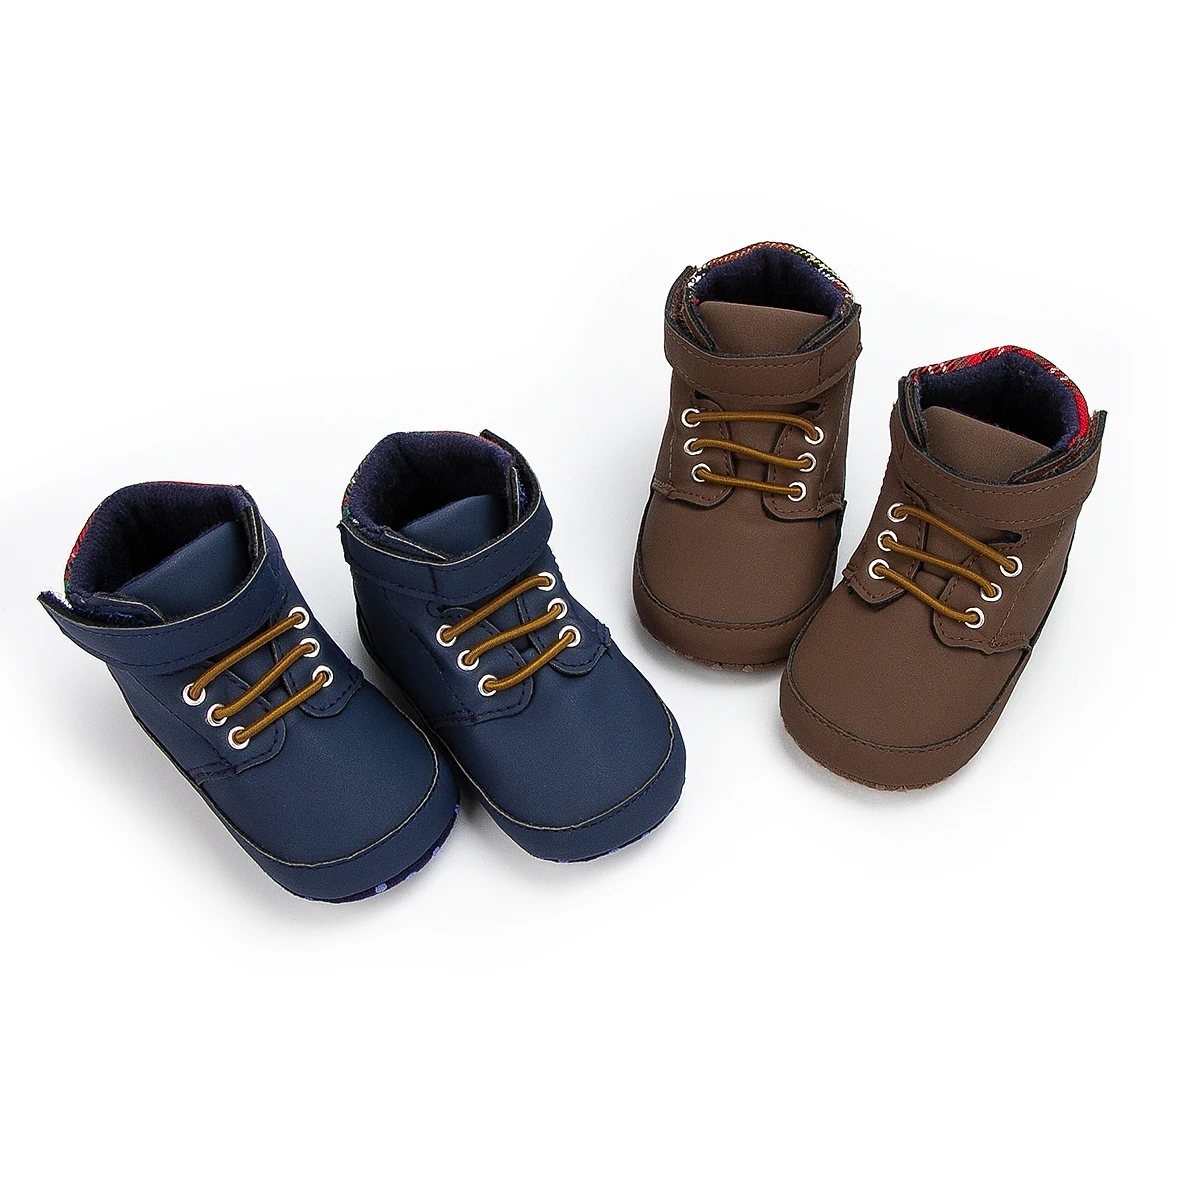 

New design Toddler Soft Sole Boy Winter Ankle 0 2 Years Infant Baby Boots, Dark blue, brown